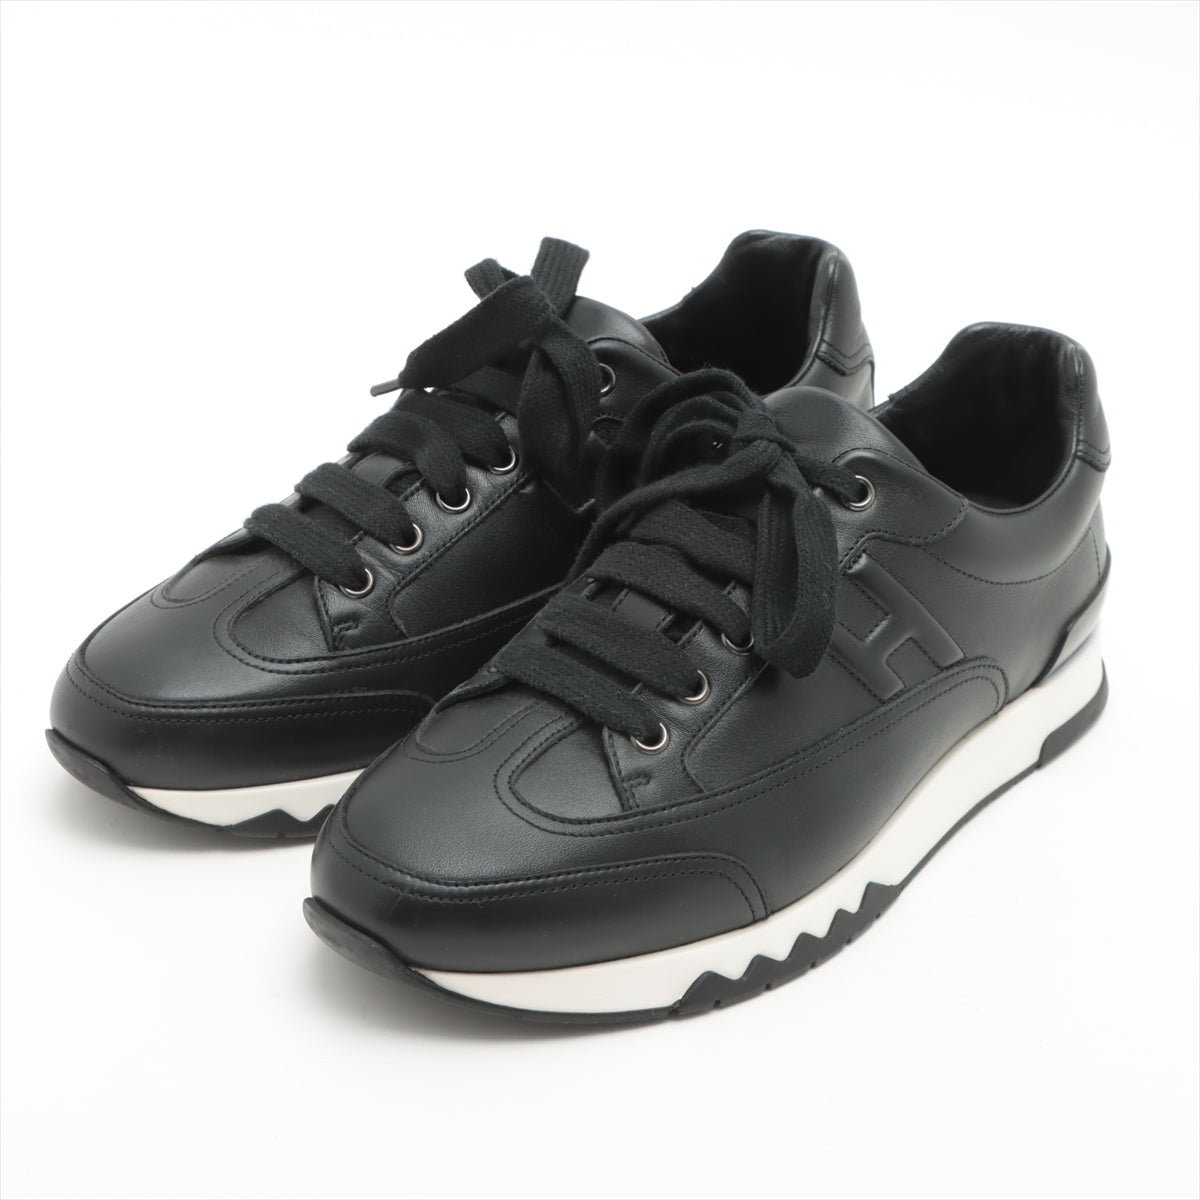 Hermès trails Leather Sneakers 40 Men's Black × White Is there a replacement string Dirt on the midsole There is a thread on the upper